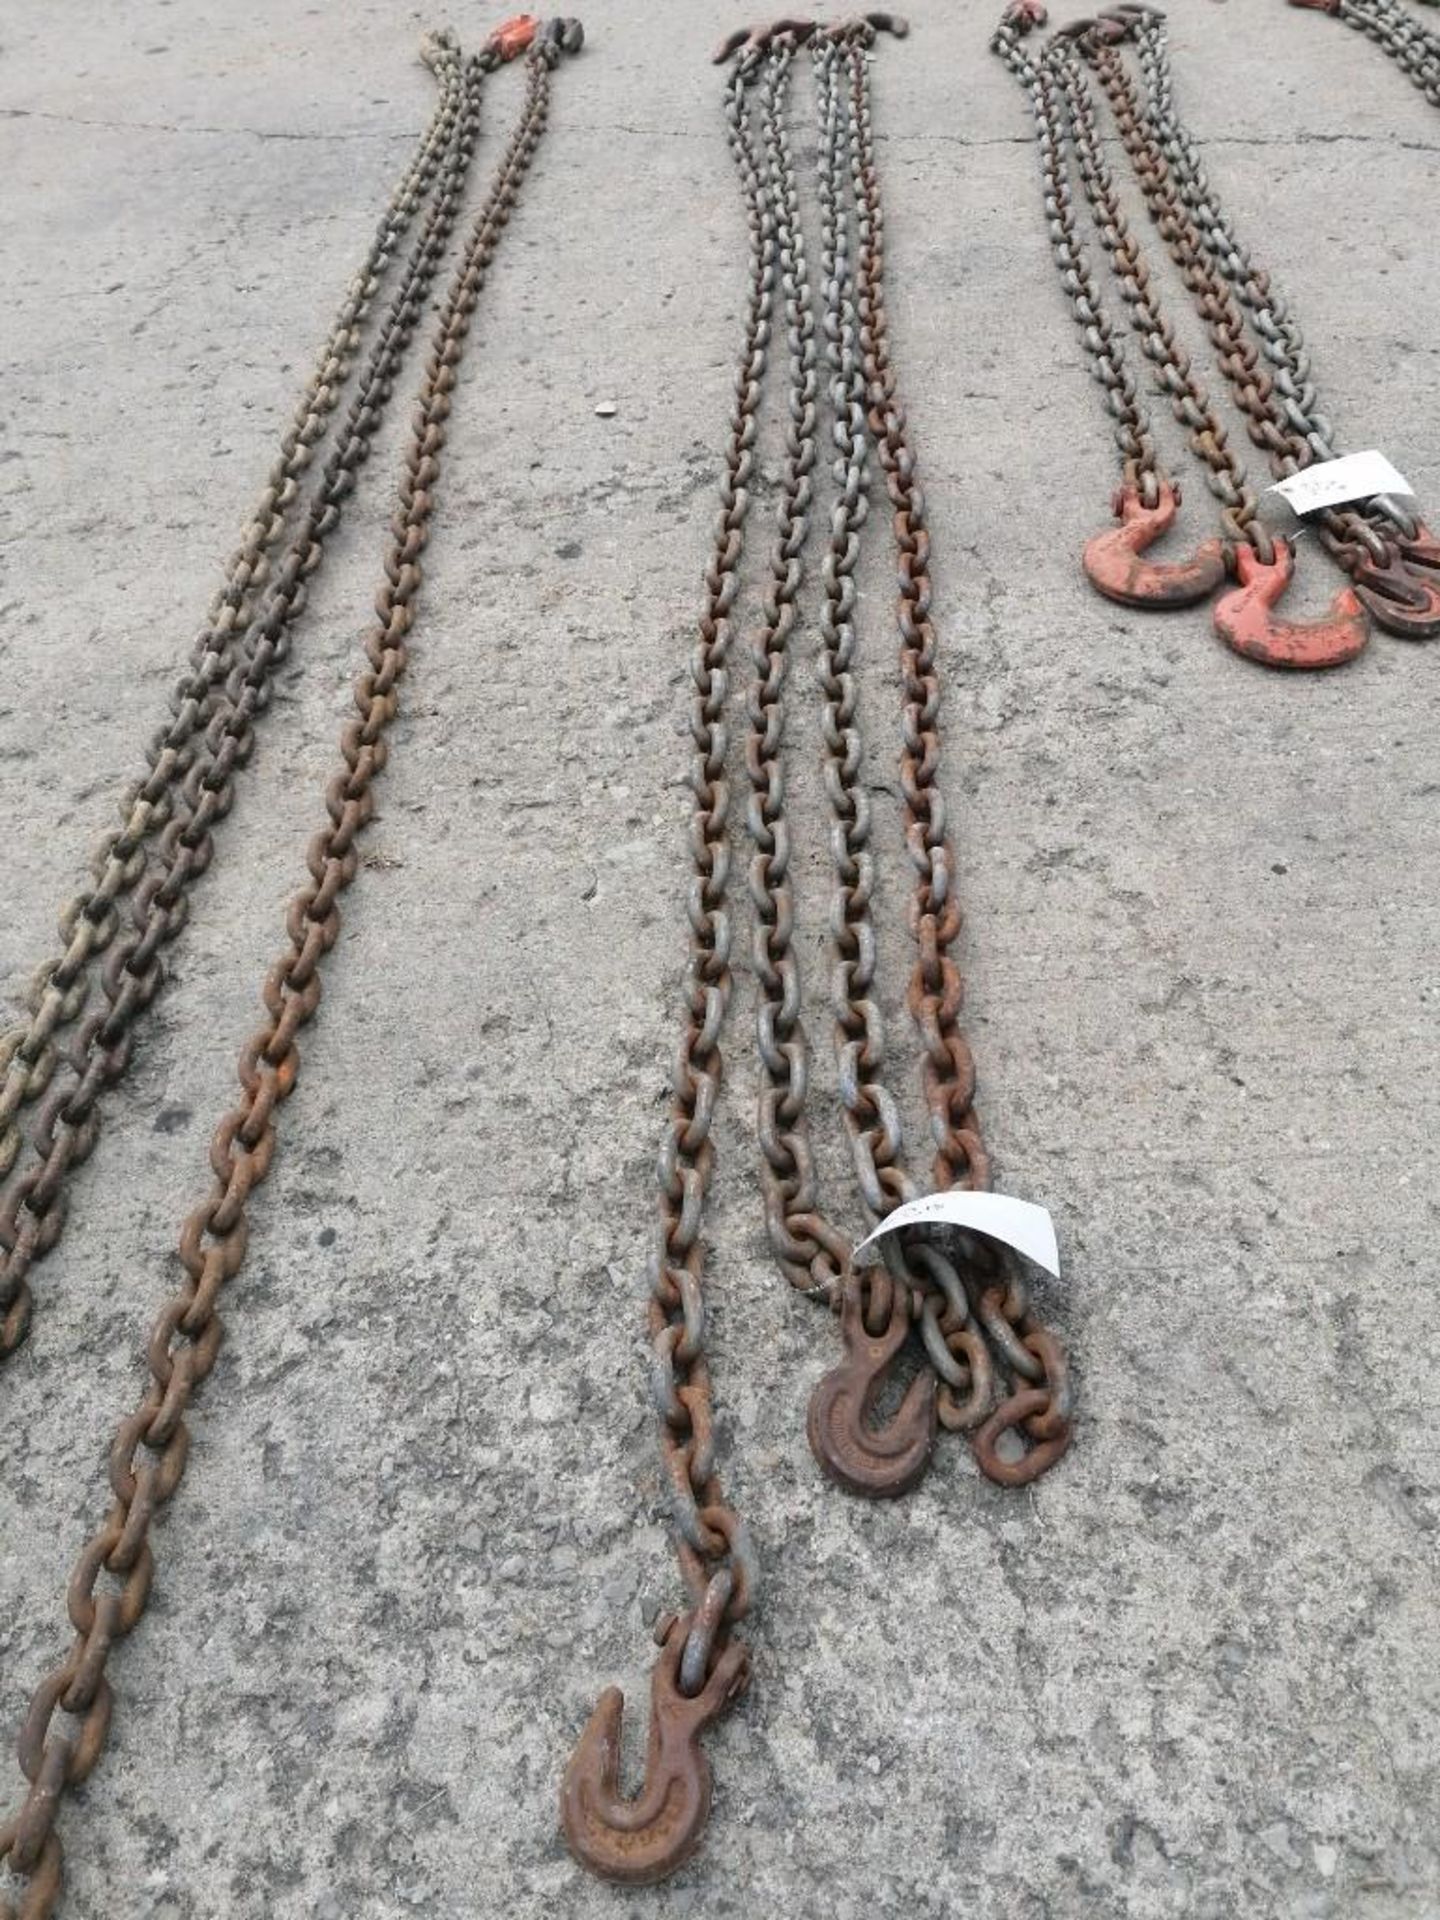 (4) 1/2" USA 9' Chain with hook. Located at 301 E Henry Street, Mt. Pleasant, IA 52641.